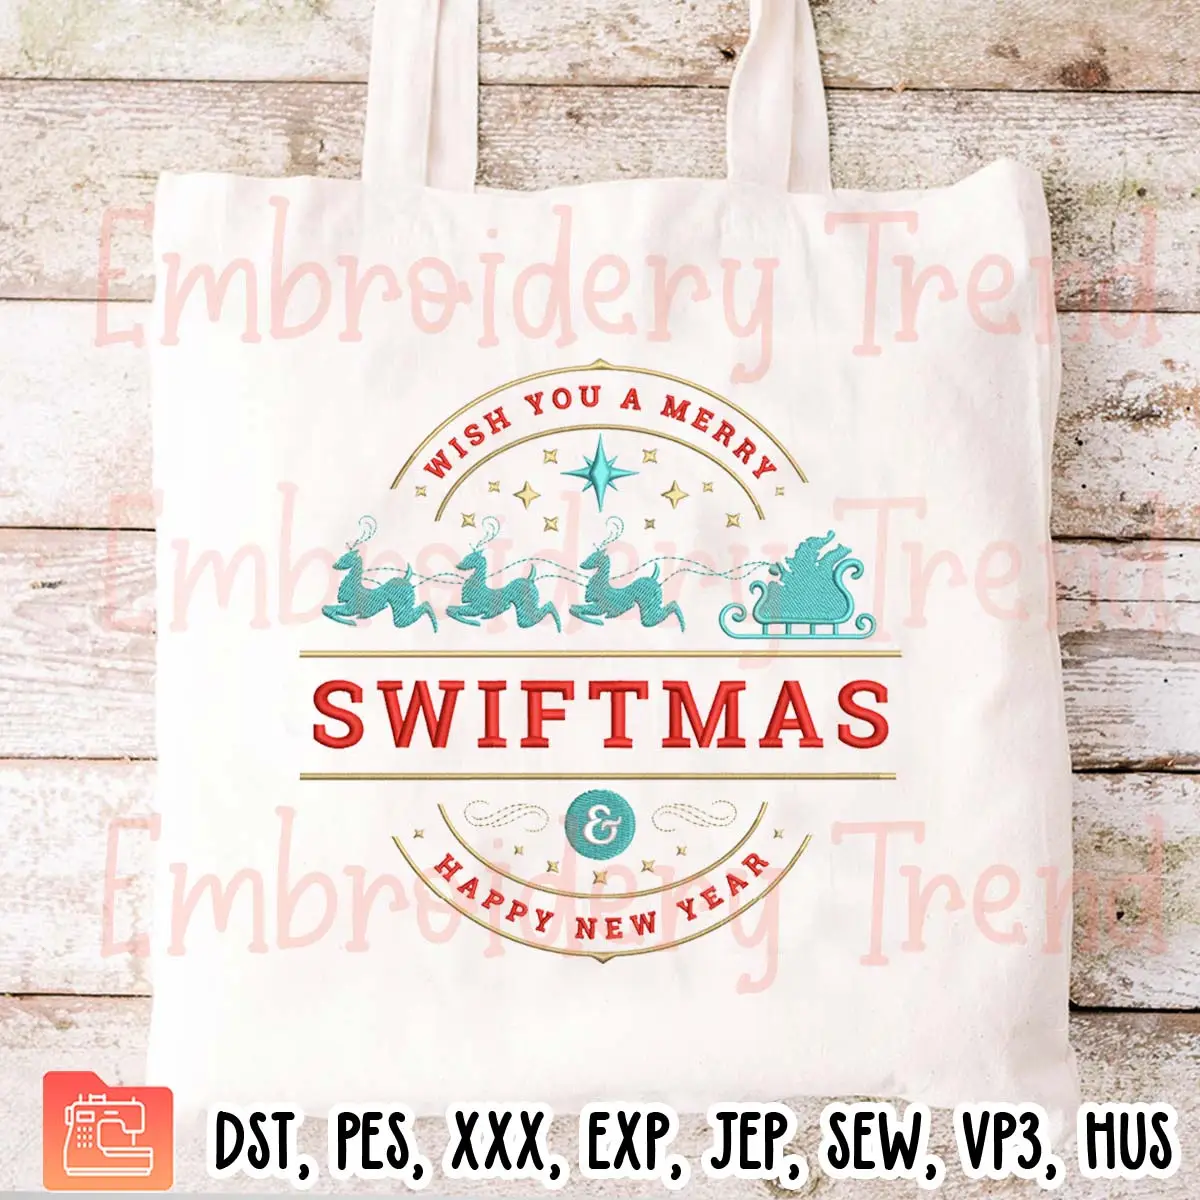 Wish You A Merry Swiftmas Vintage Embroidery Design, Happy New Year Taylor Swift Embroidery Digitizing Pes File